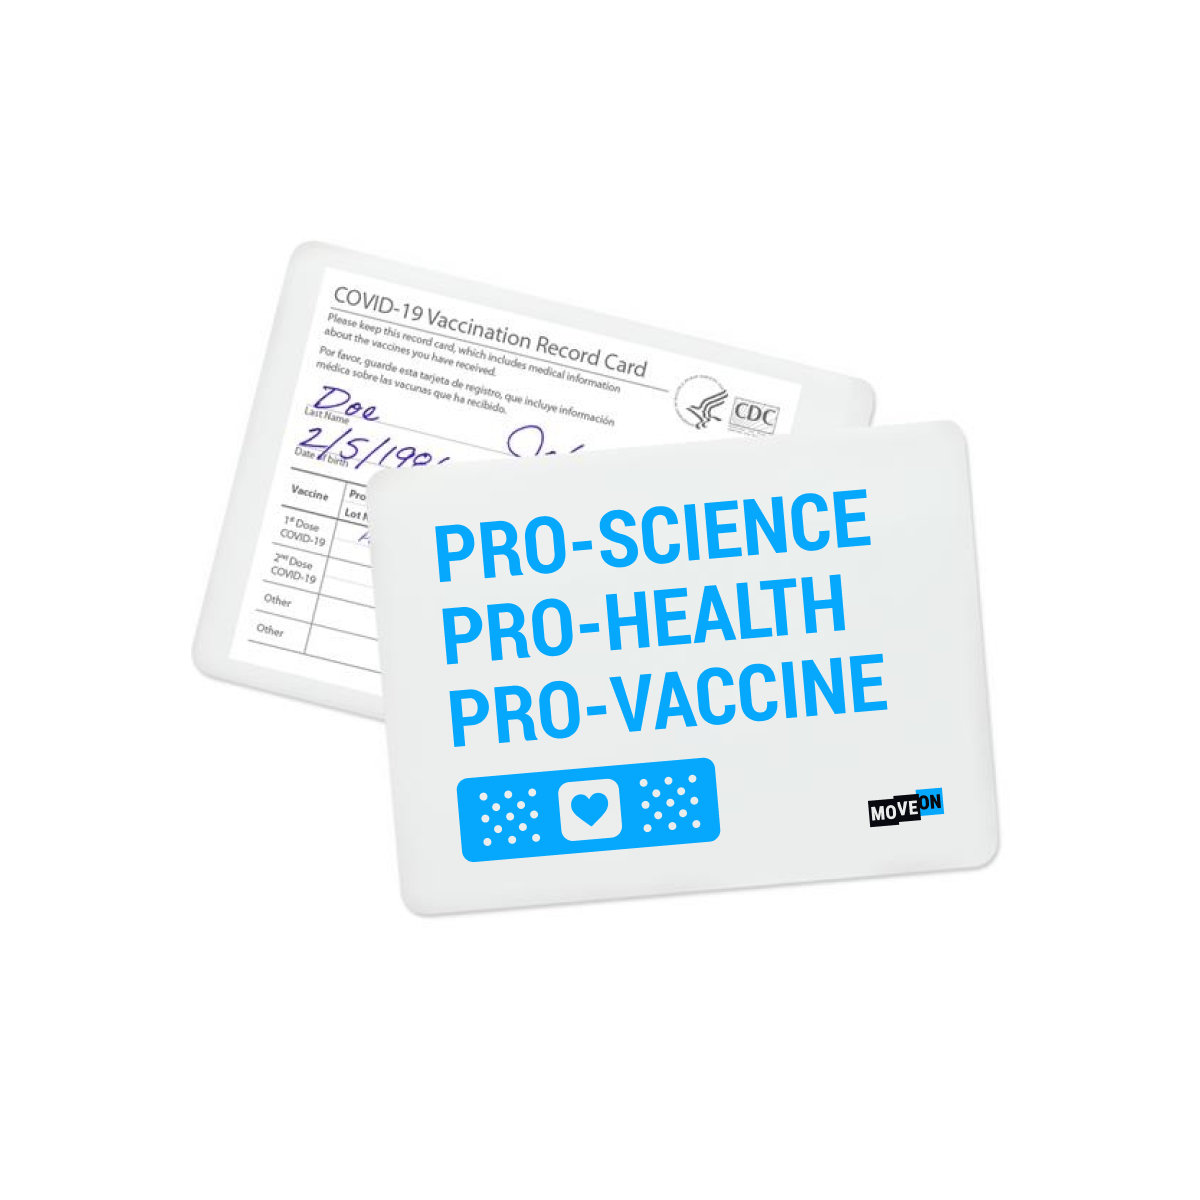 Limited-Edition Vaccination Card Holder